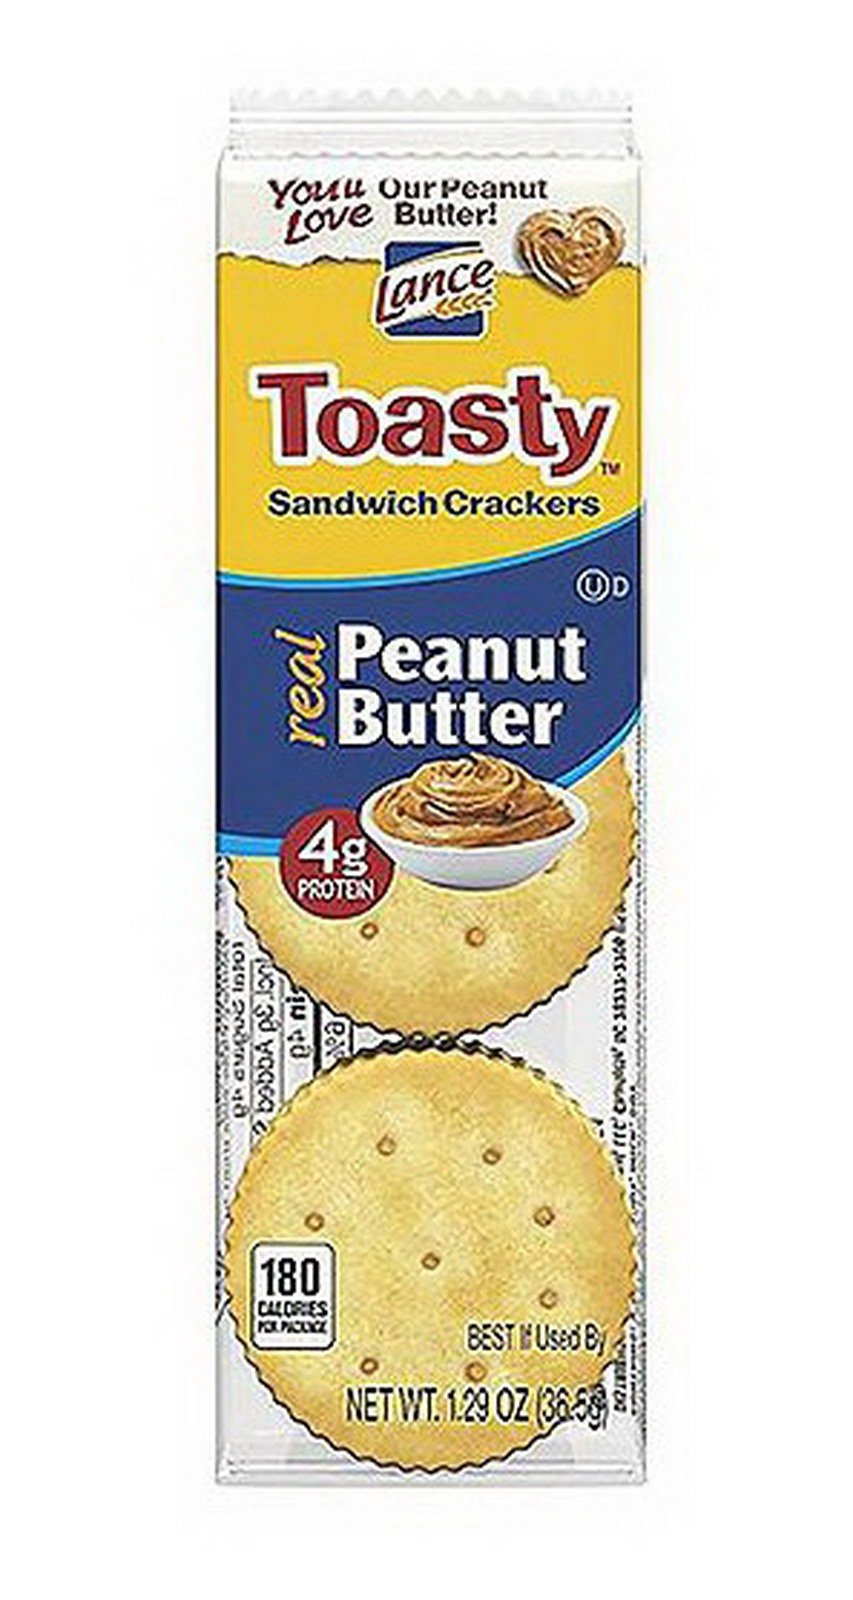 Two 40 Packs Lance Toasty Peanut Butter Sandwich Crackers Snacks